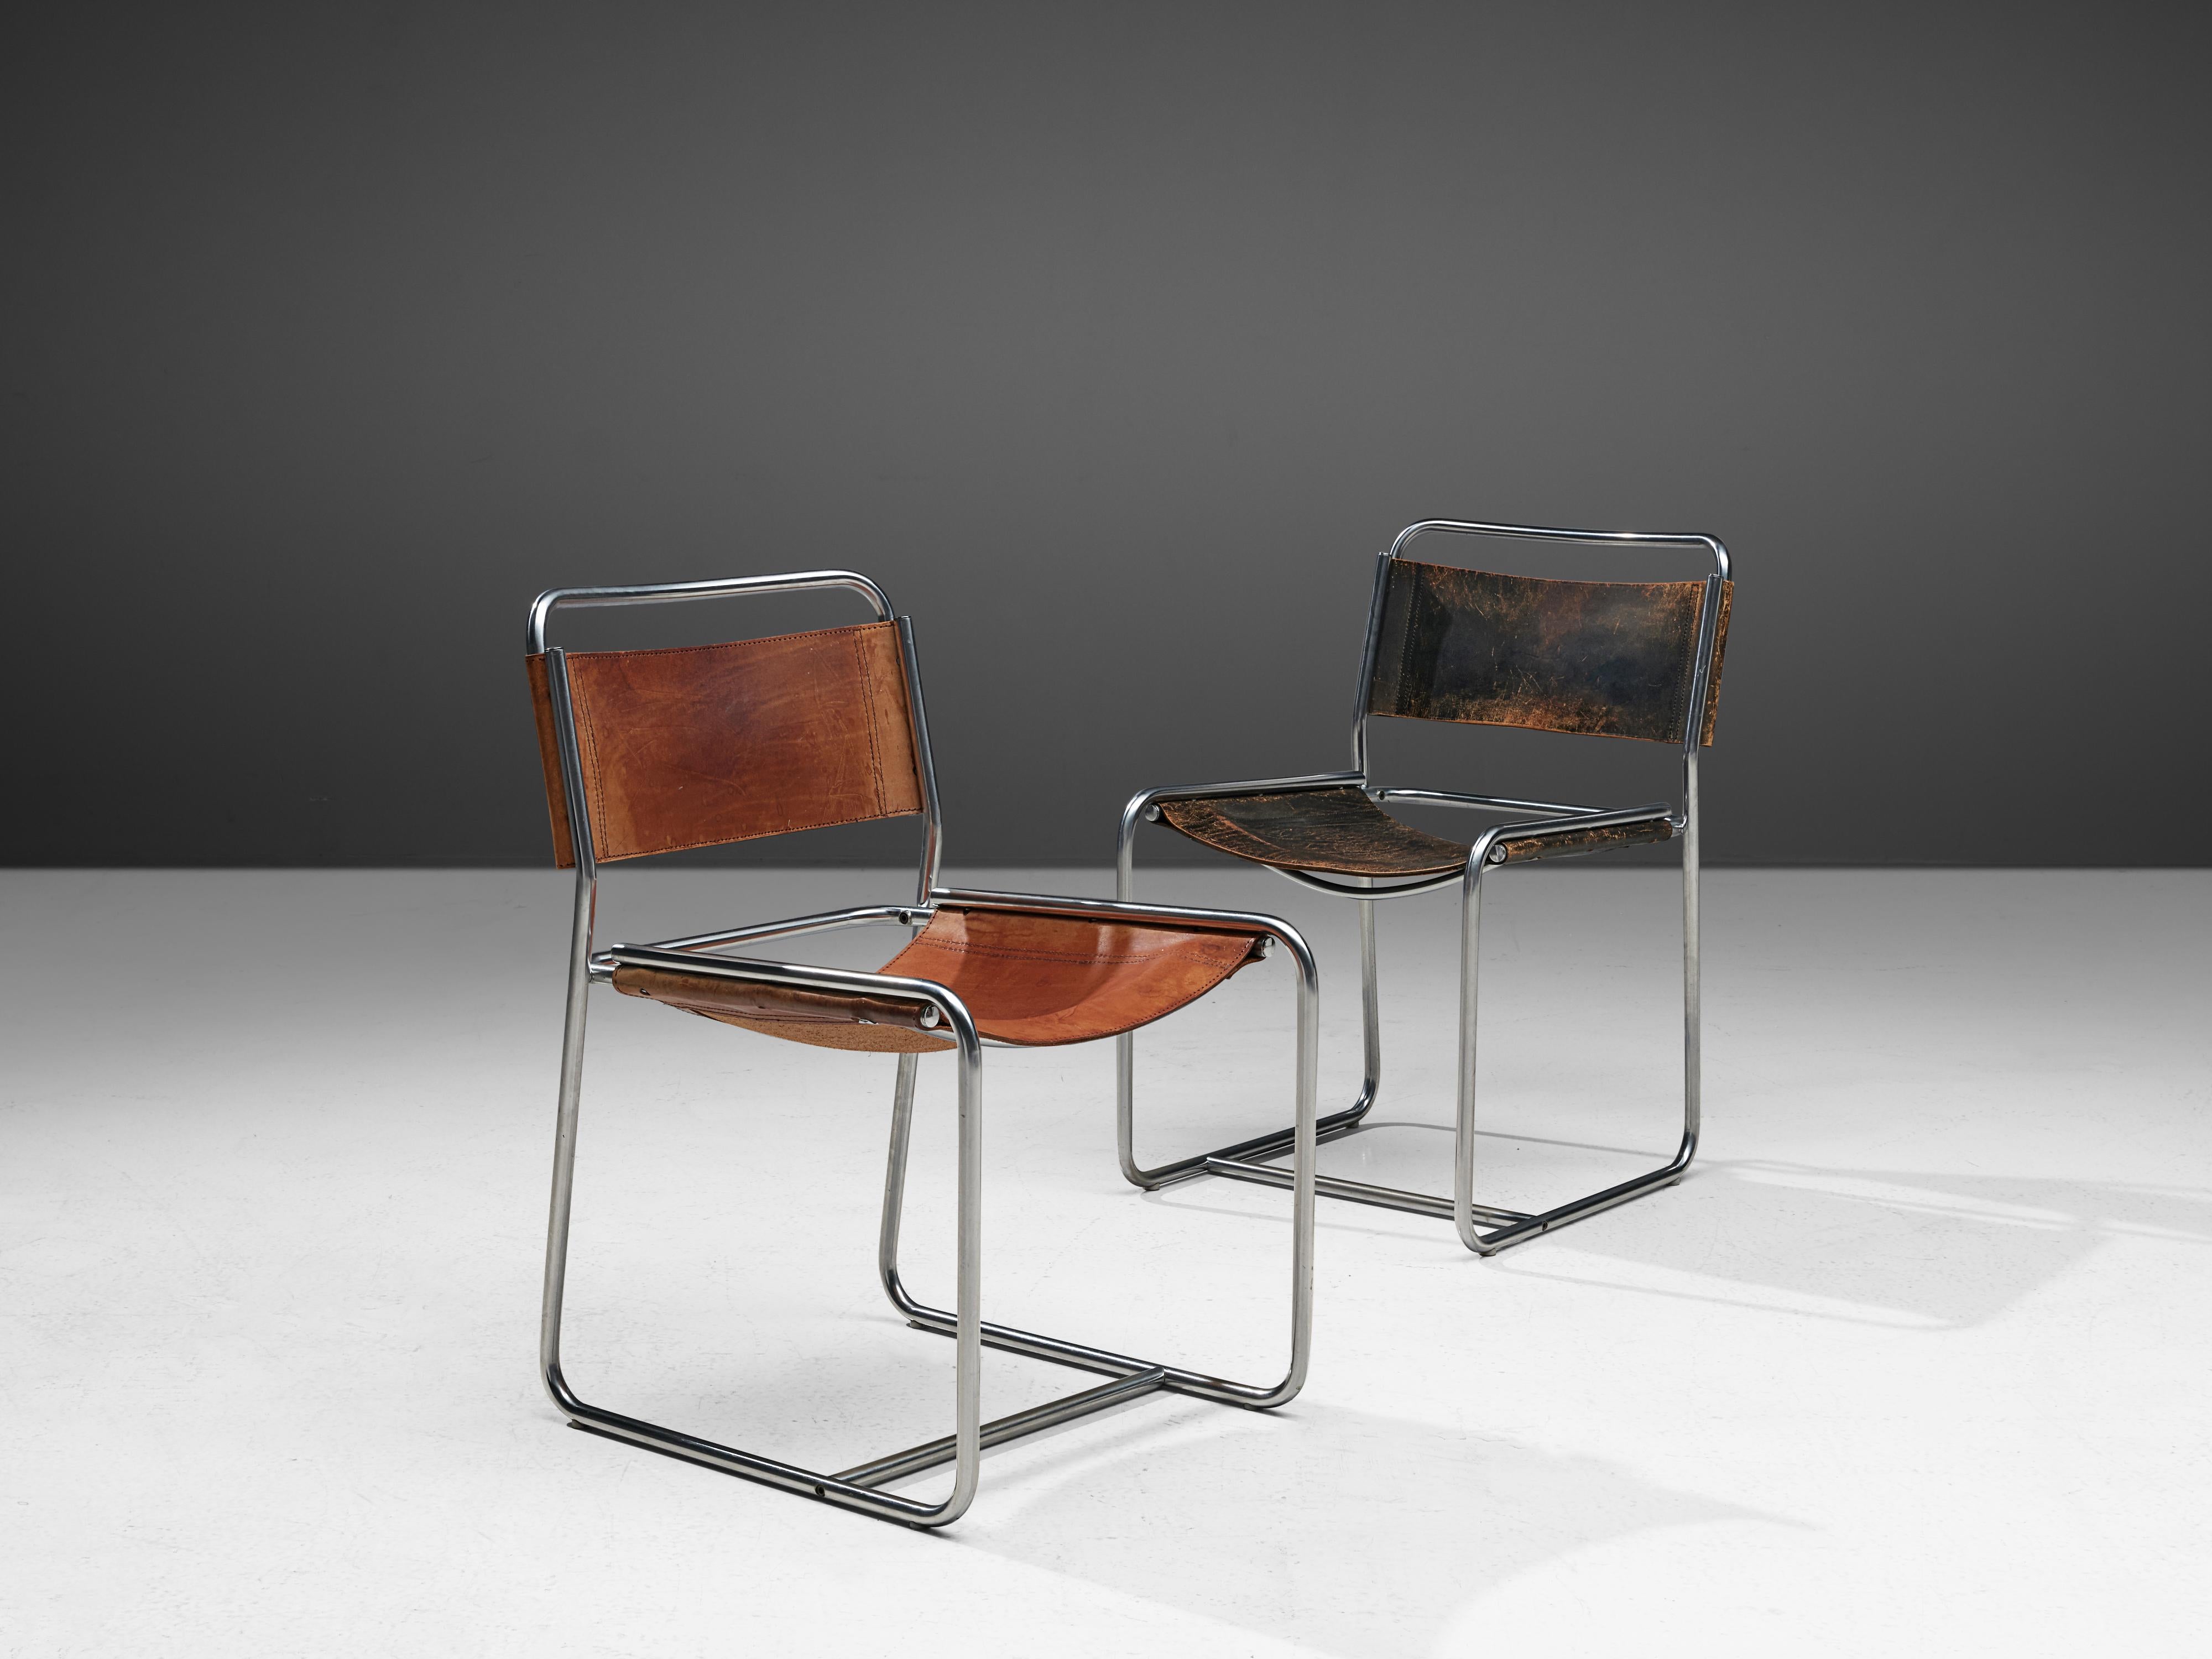 Metal Claire Bataille and Paul Ibens Dining Chairs in Cognac and Black Leather